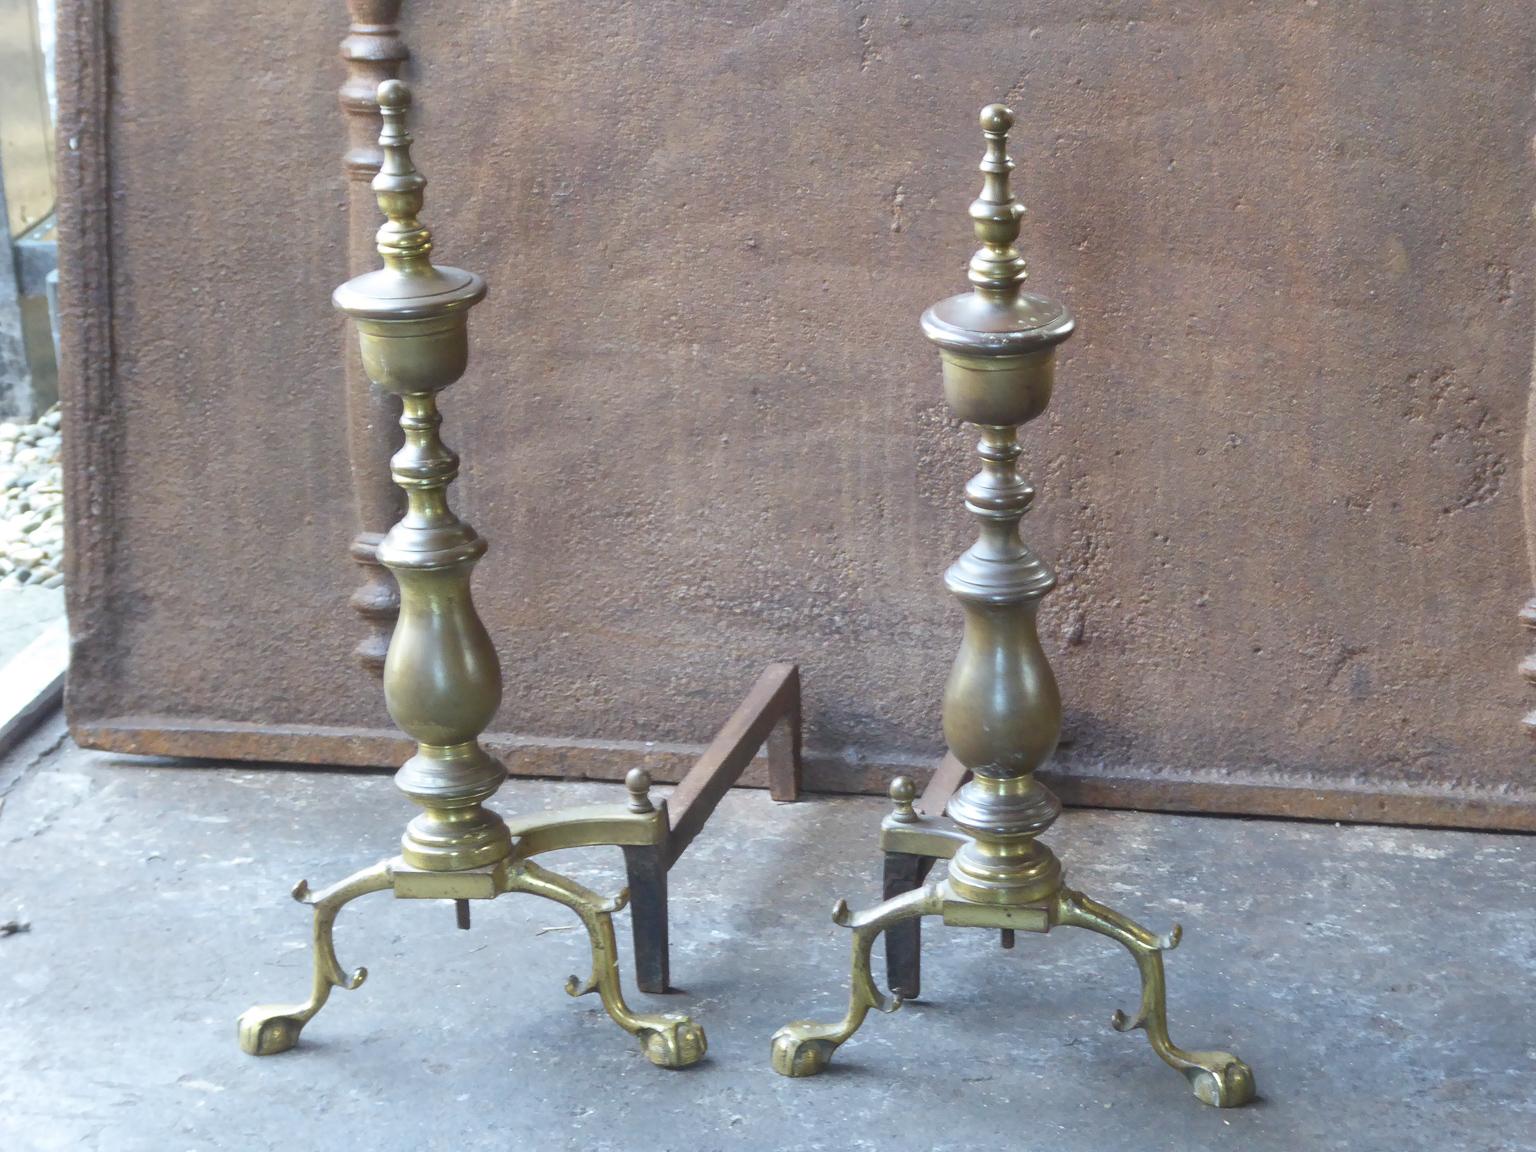 Made ans signed by Sheffield, New York

We have a unique and specialized collection of antique and used fireplace accessories consisting of more than 1000 listings at 1stdibs. Amongst others we always have 300+ firebacks, 250+ pairs of andirons